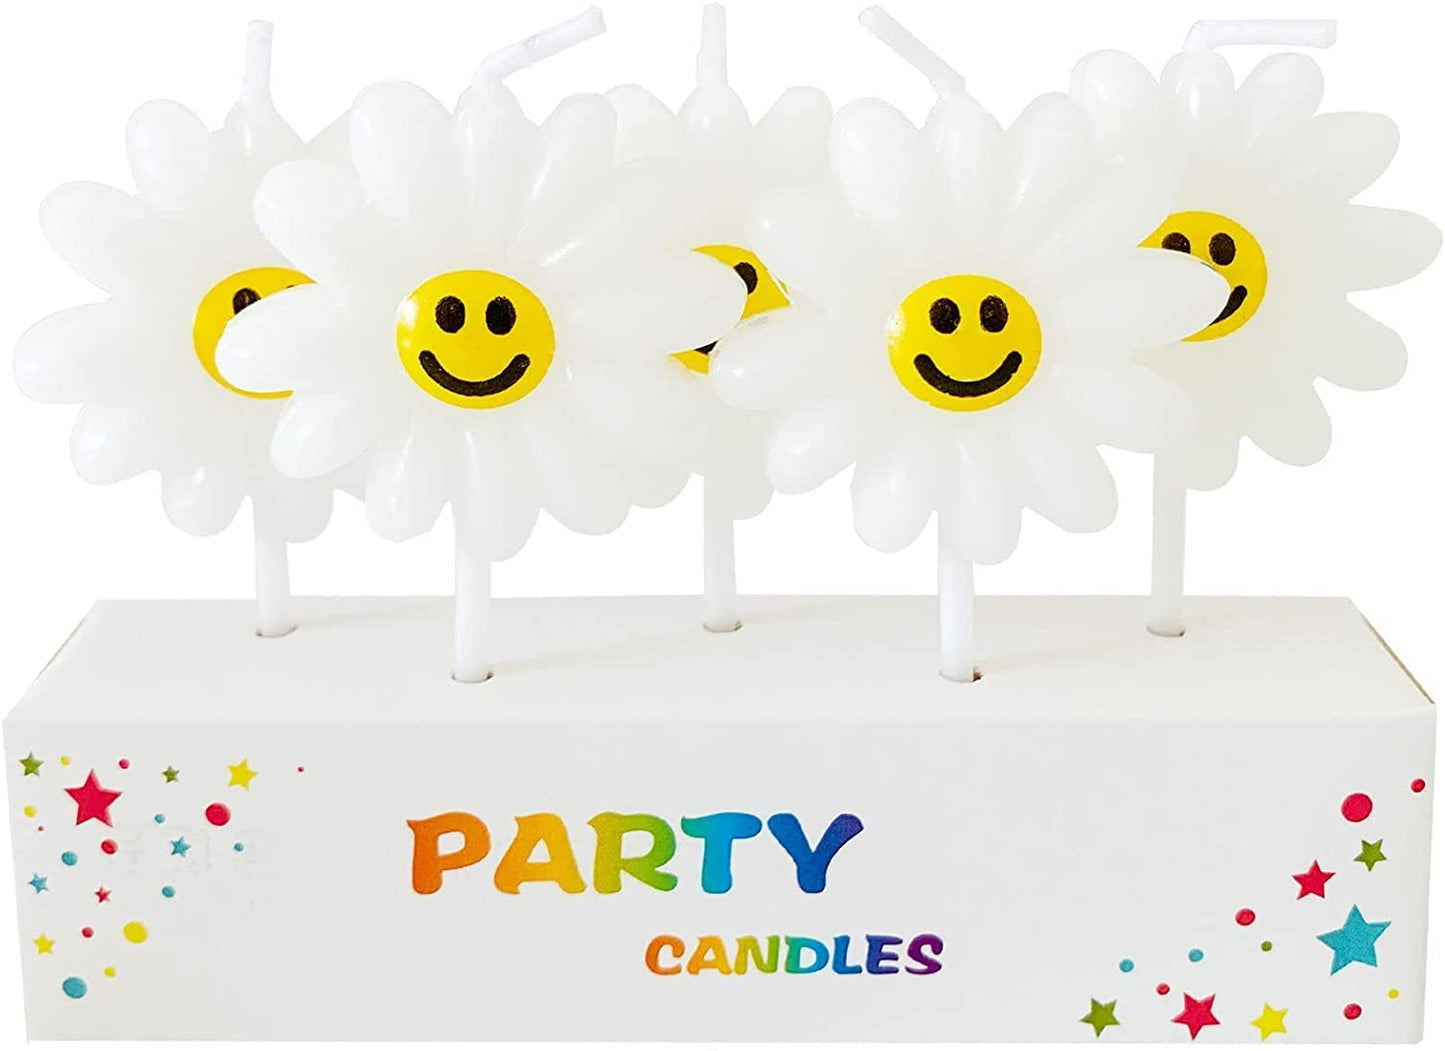 Sunflower Birthday Candles for Cake, Birthday Candles for Girls & Boys, Unique Flower Candle for Cake Decoration with Smiley (Set of 5)